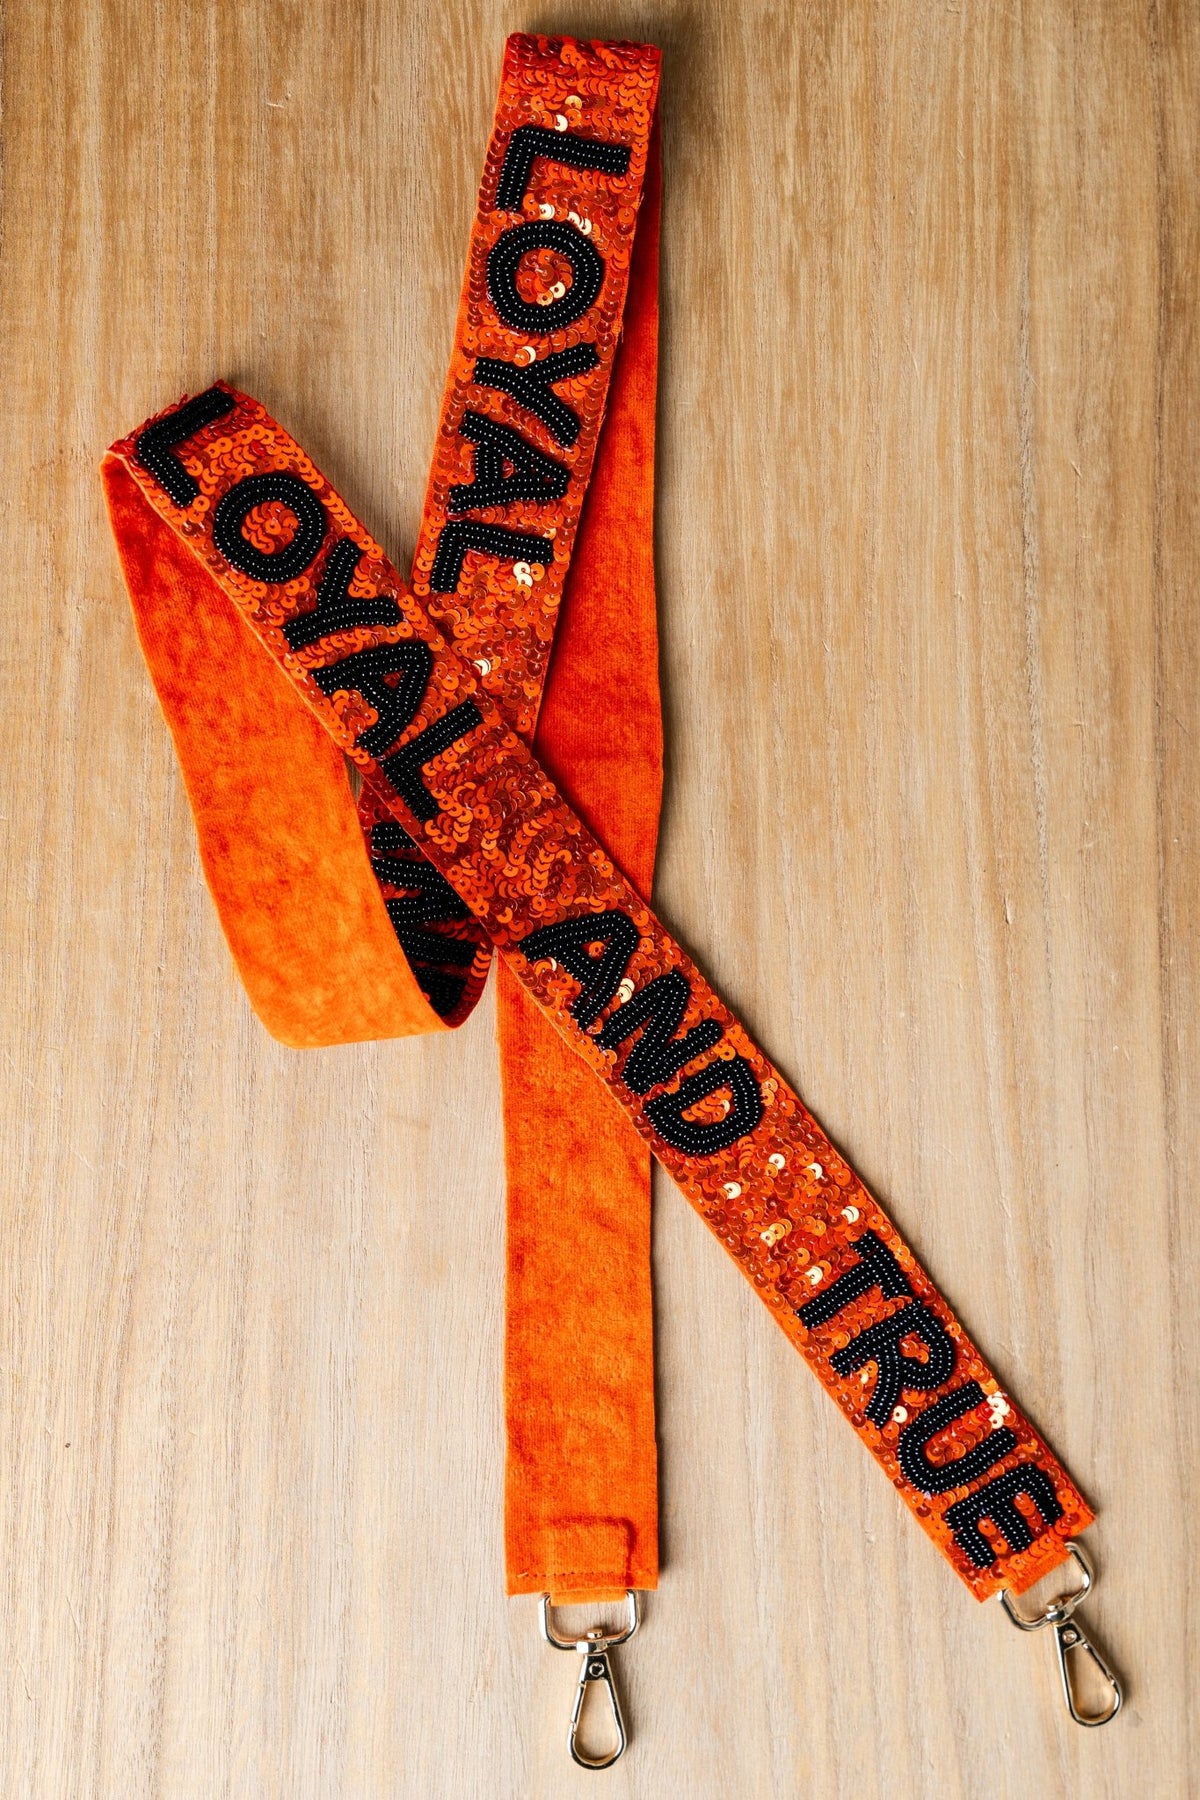 OSU Loyal and True sequin beaded guitar strap orange - Trendy Bags at Lush Fashion Lounge Boutique in Oklahoma City